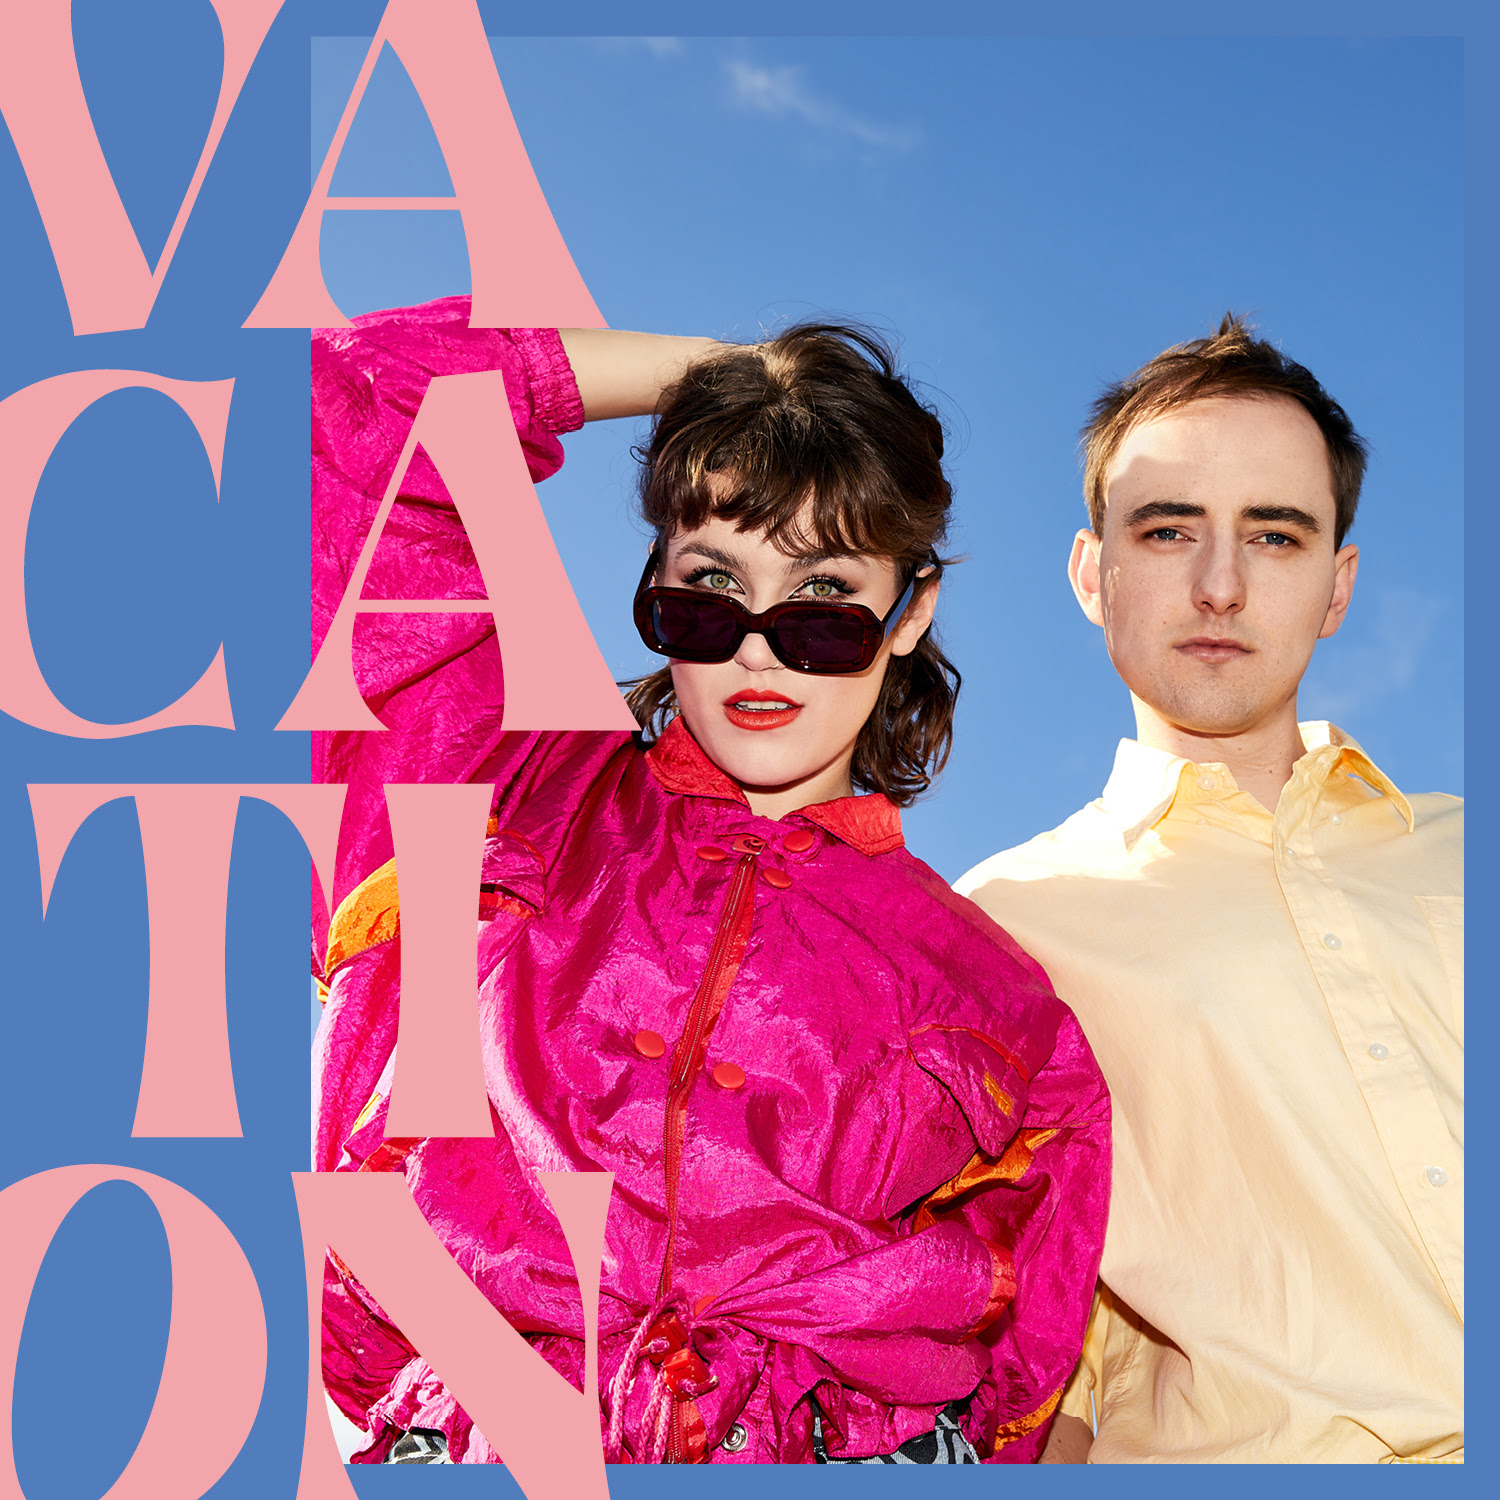 Man and woman in pink and beige clothing against light blue background with super imposed large pink text that reads "Vacations"